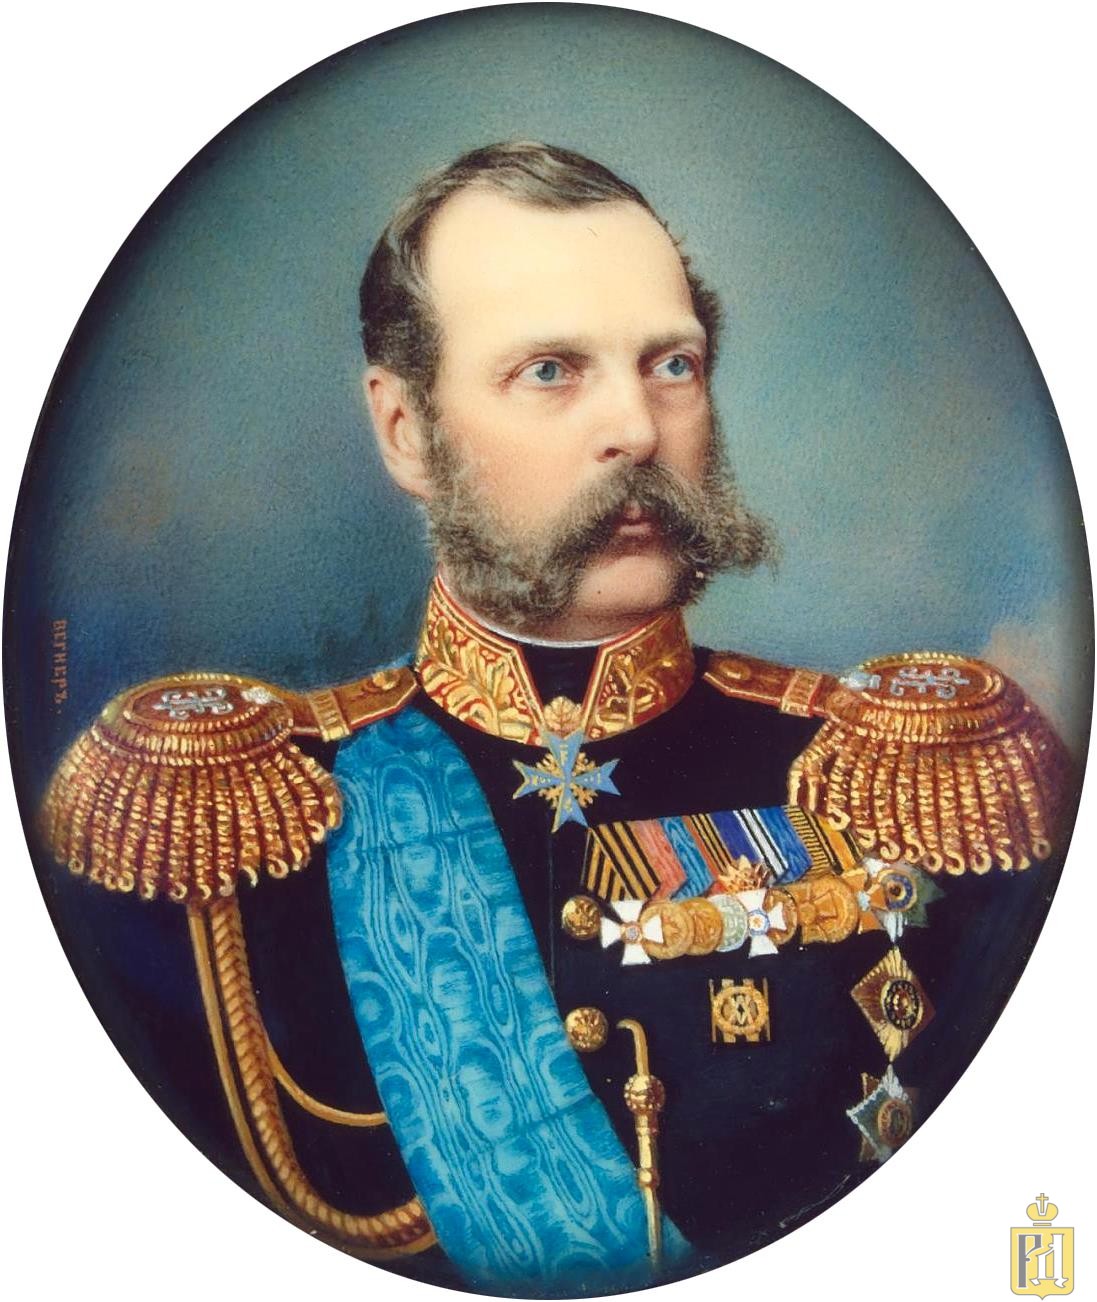 Alexander_II_of_Russia_by_A.M.Wegner_(1870s,_Hermitage)